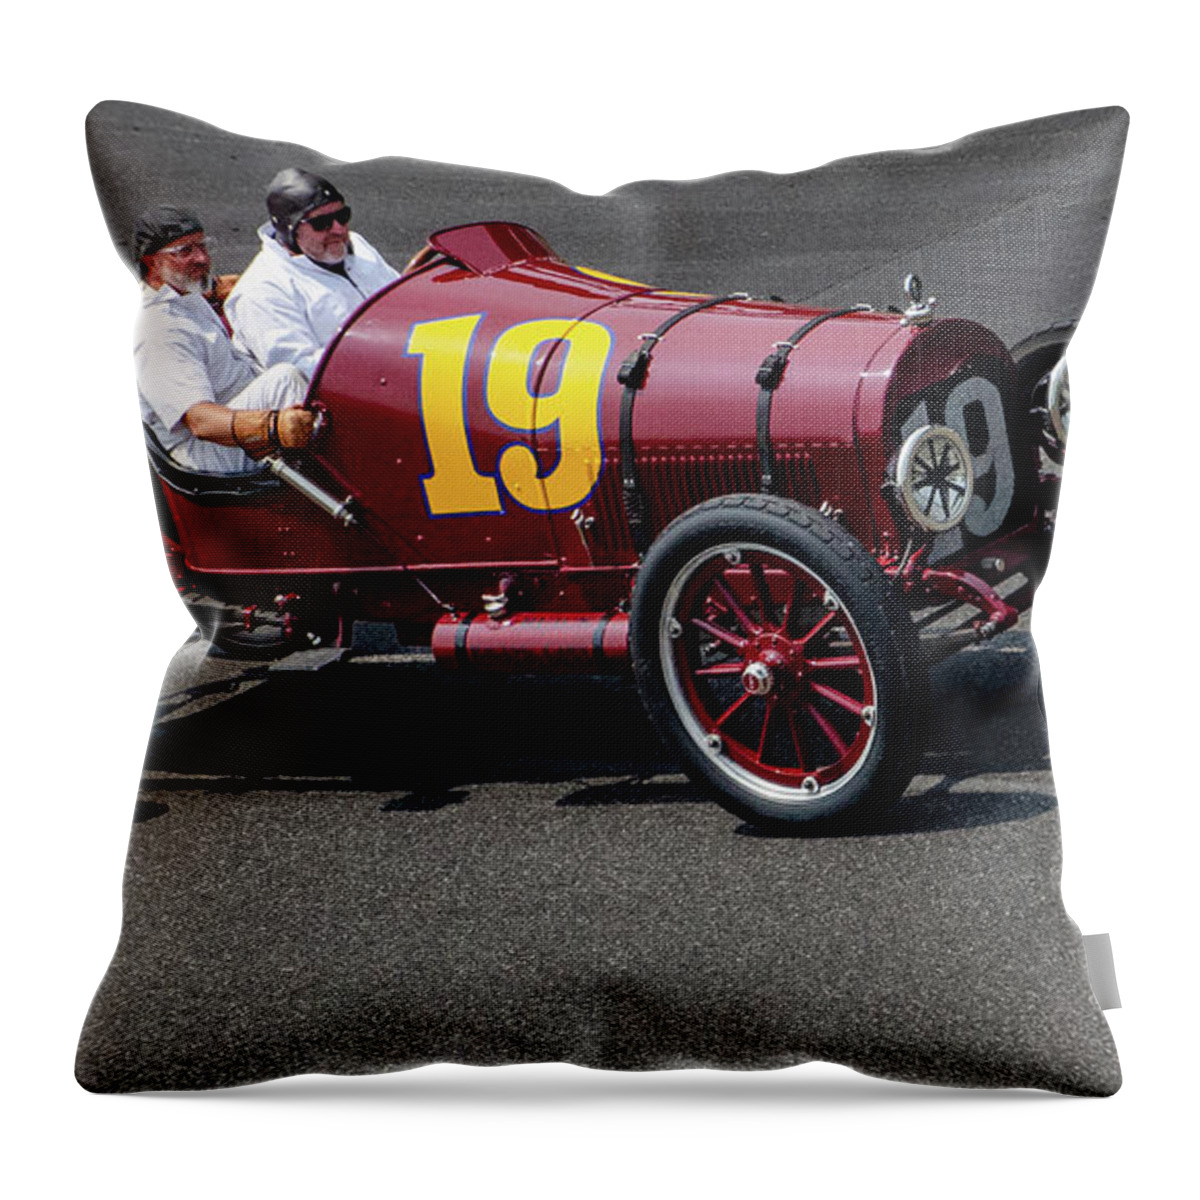 Svra Throw Pillow featuring the photograph 1919 Buick Racer by Josh Williams